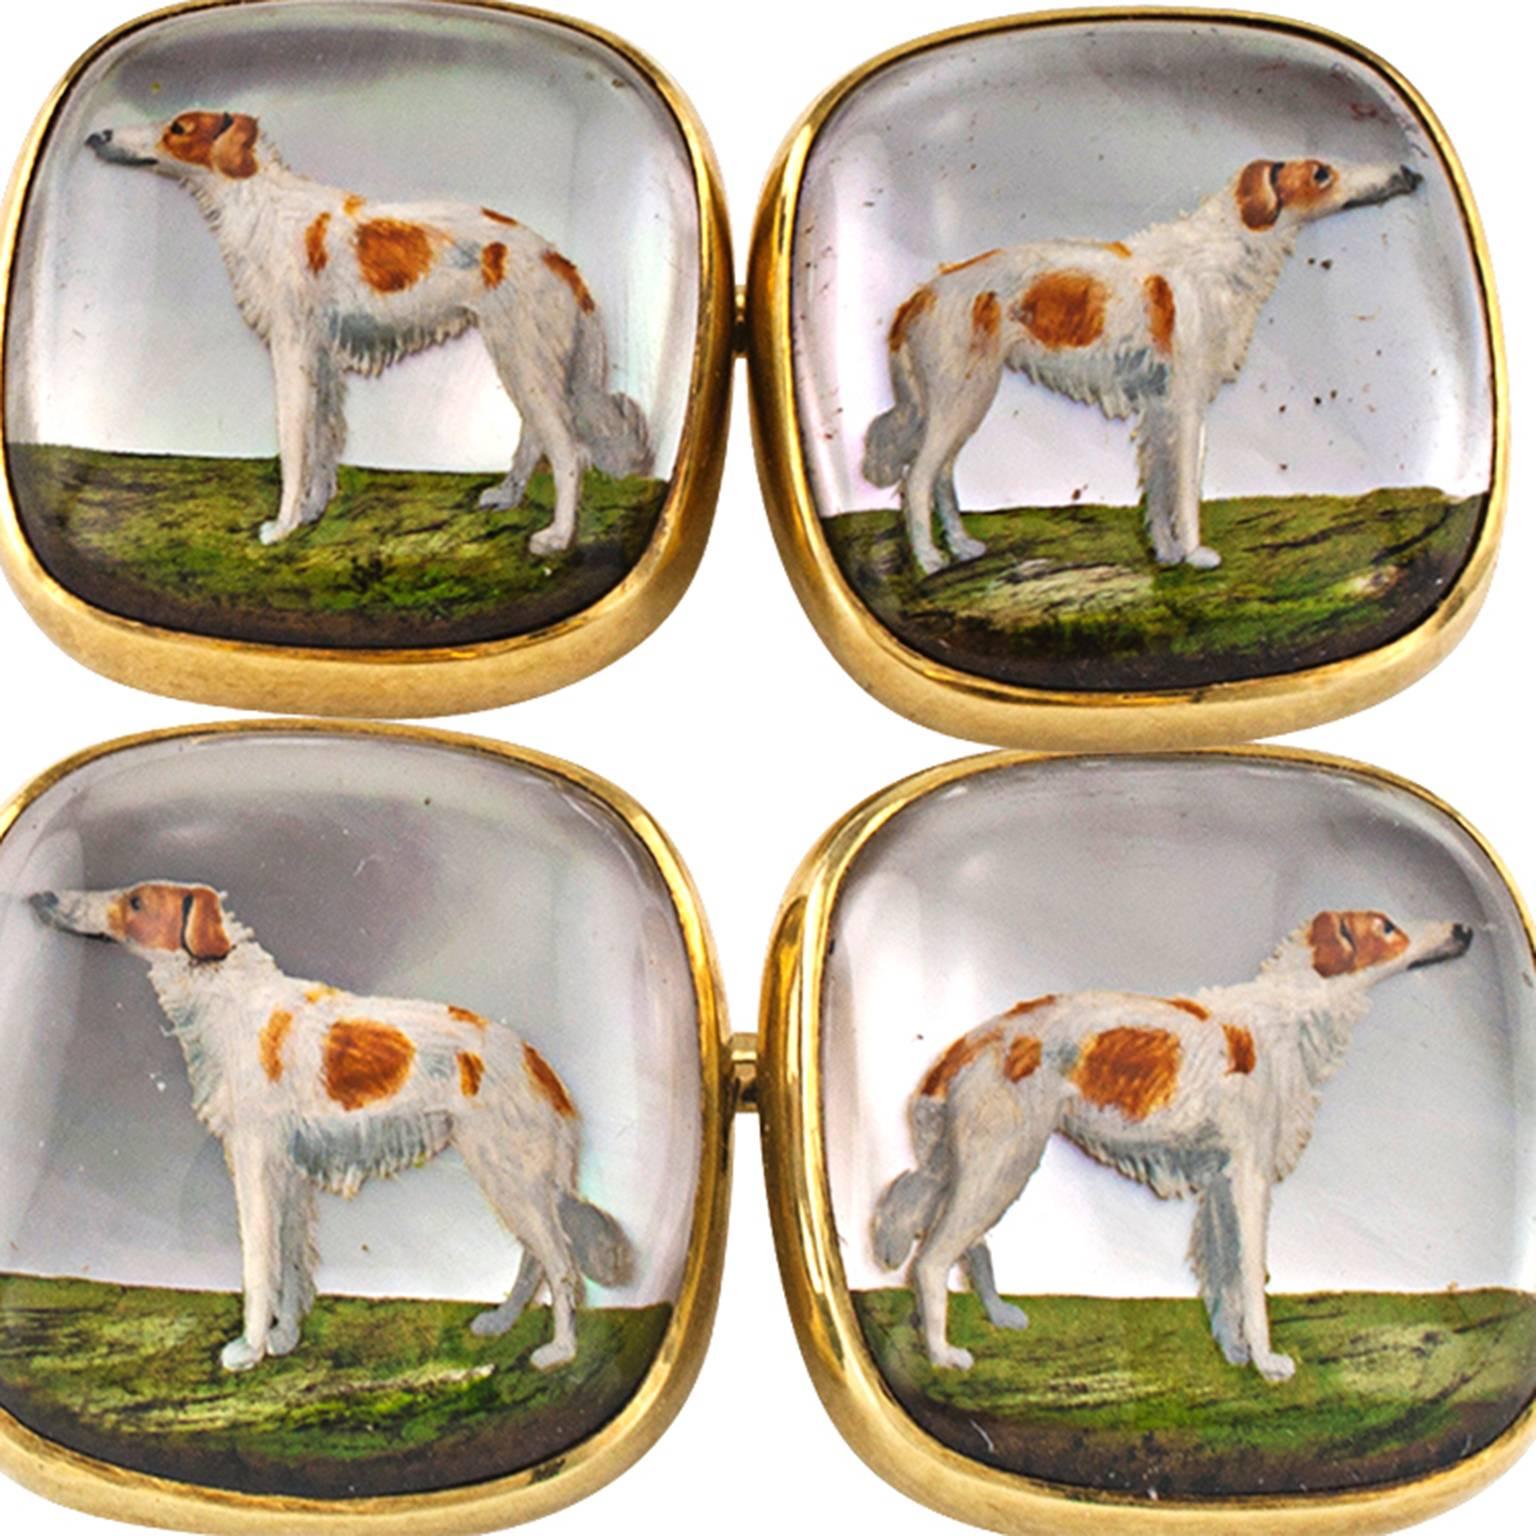 Borzoi Dogs Essex Crystal Cuff Links by Enos Richardson

Colorful Essex crystal cuff links comprising four bezel-set reverse carved Dog crystals, each measuring approximately 1/2" X 1/2" overall, with link connectors.  Mounted in 14  karat